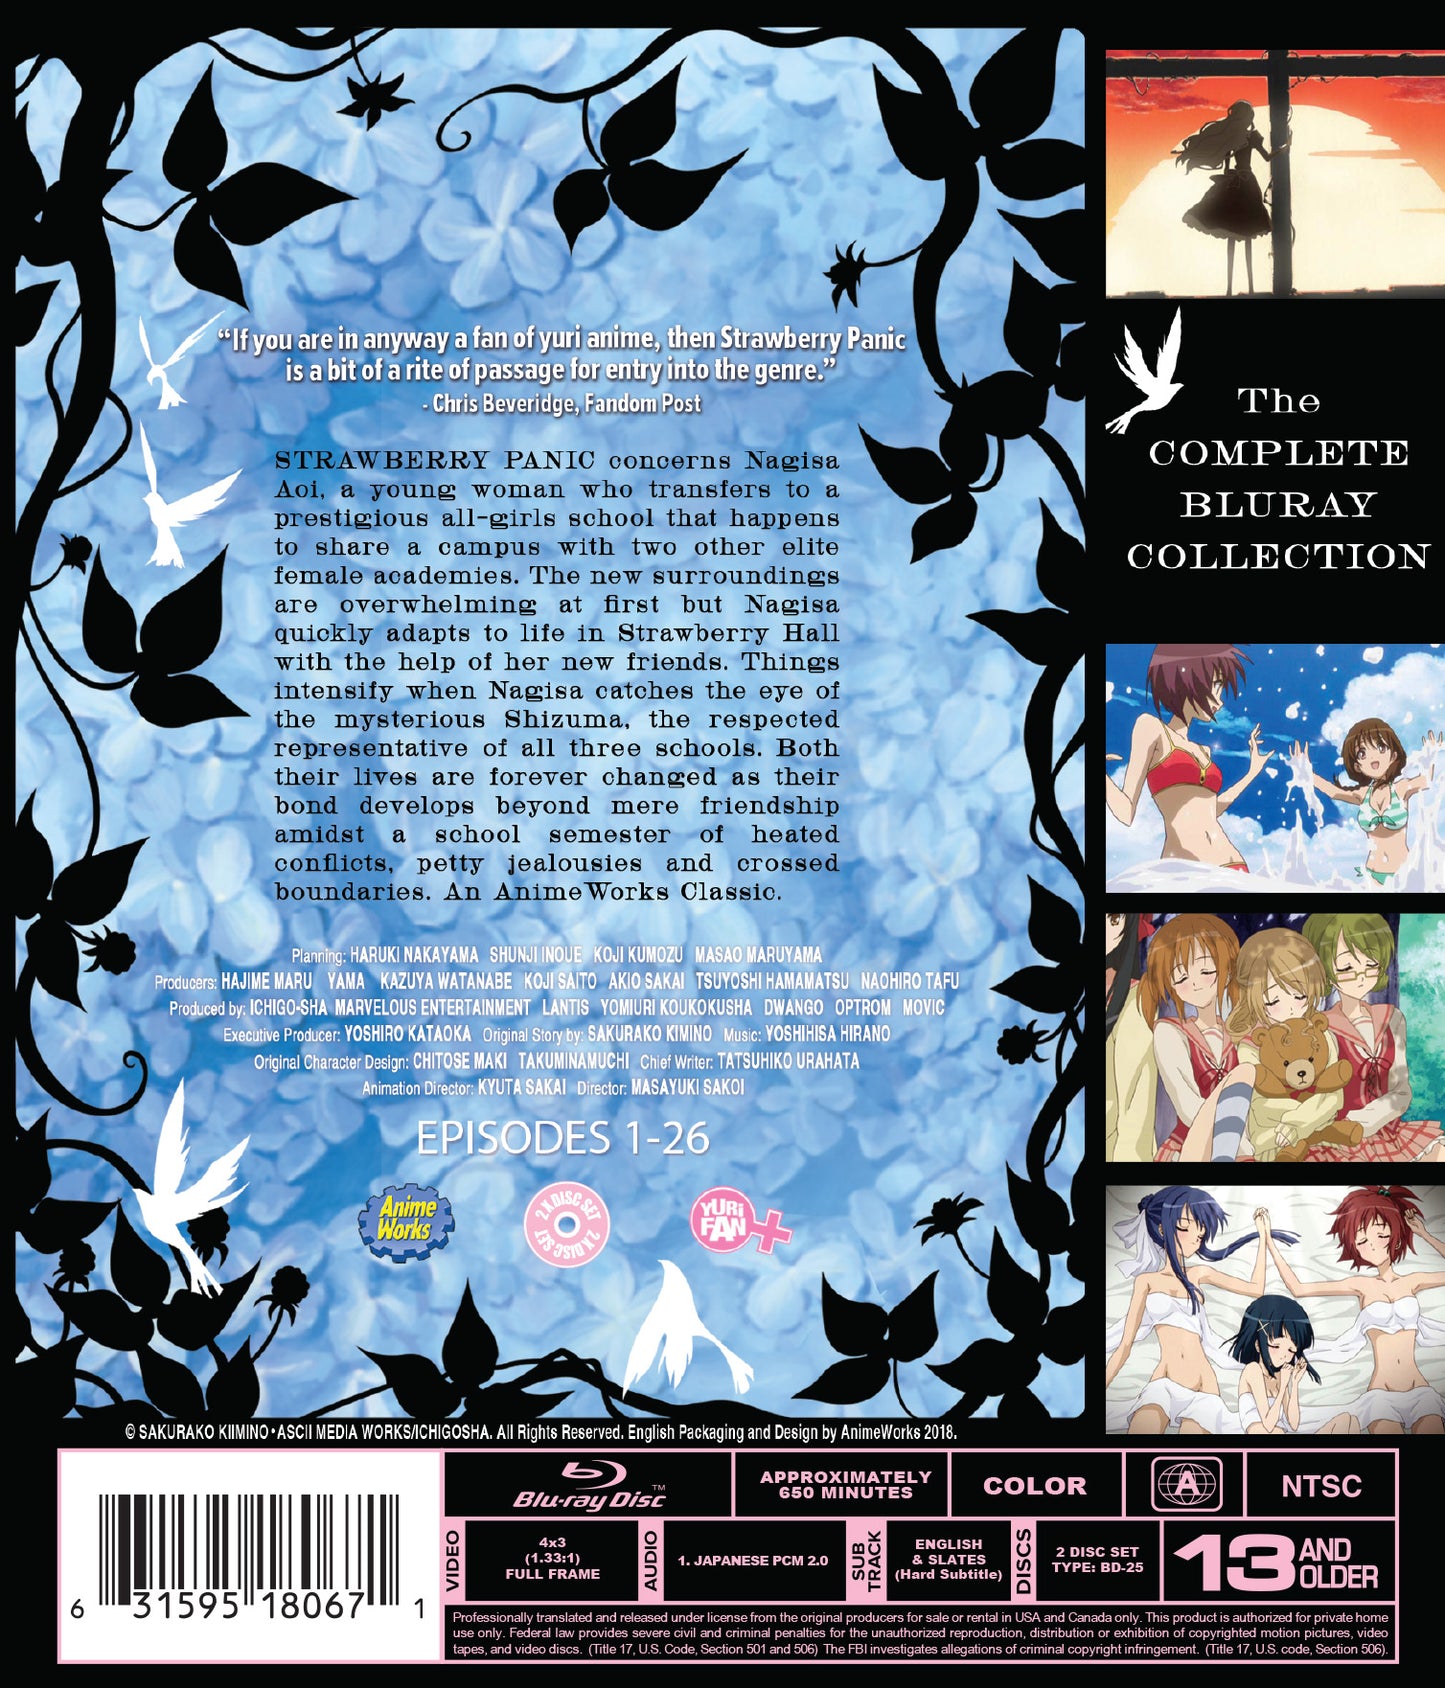 Strawberry Panic Collection [BD]